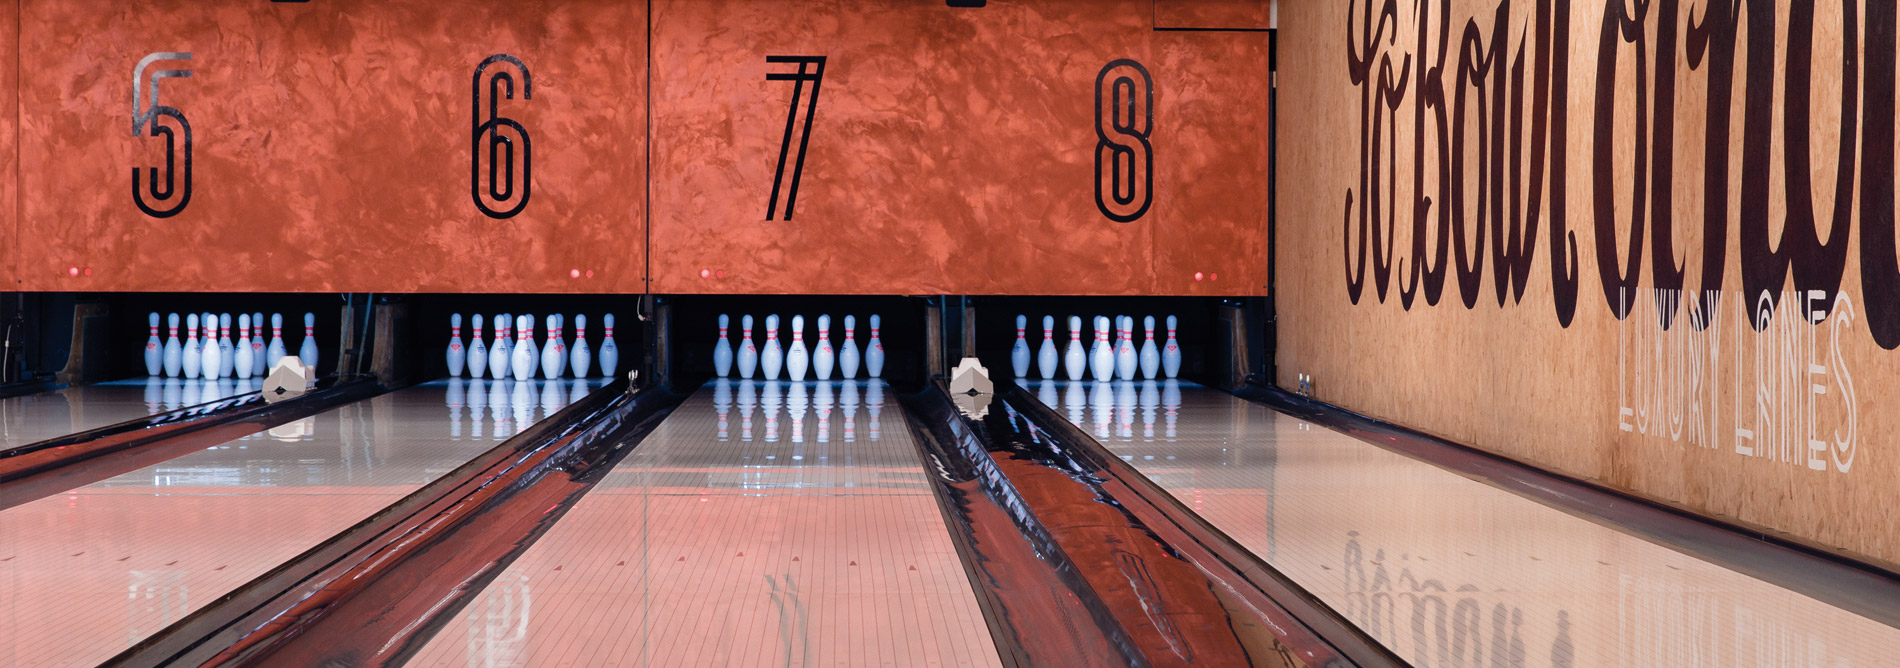 QUBICAAMF-bowling-boutique-Olround-Bowling-banner.jpg